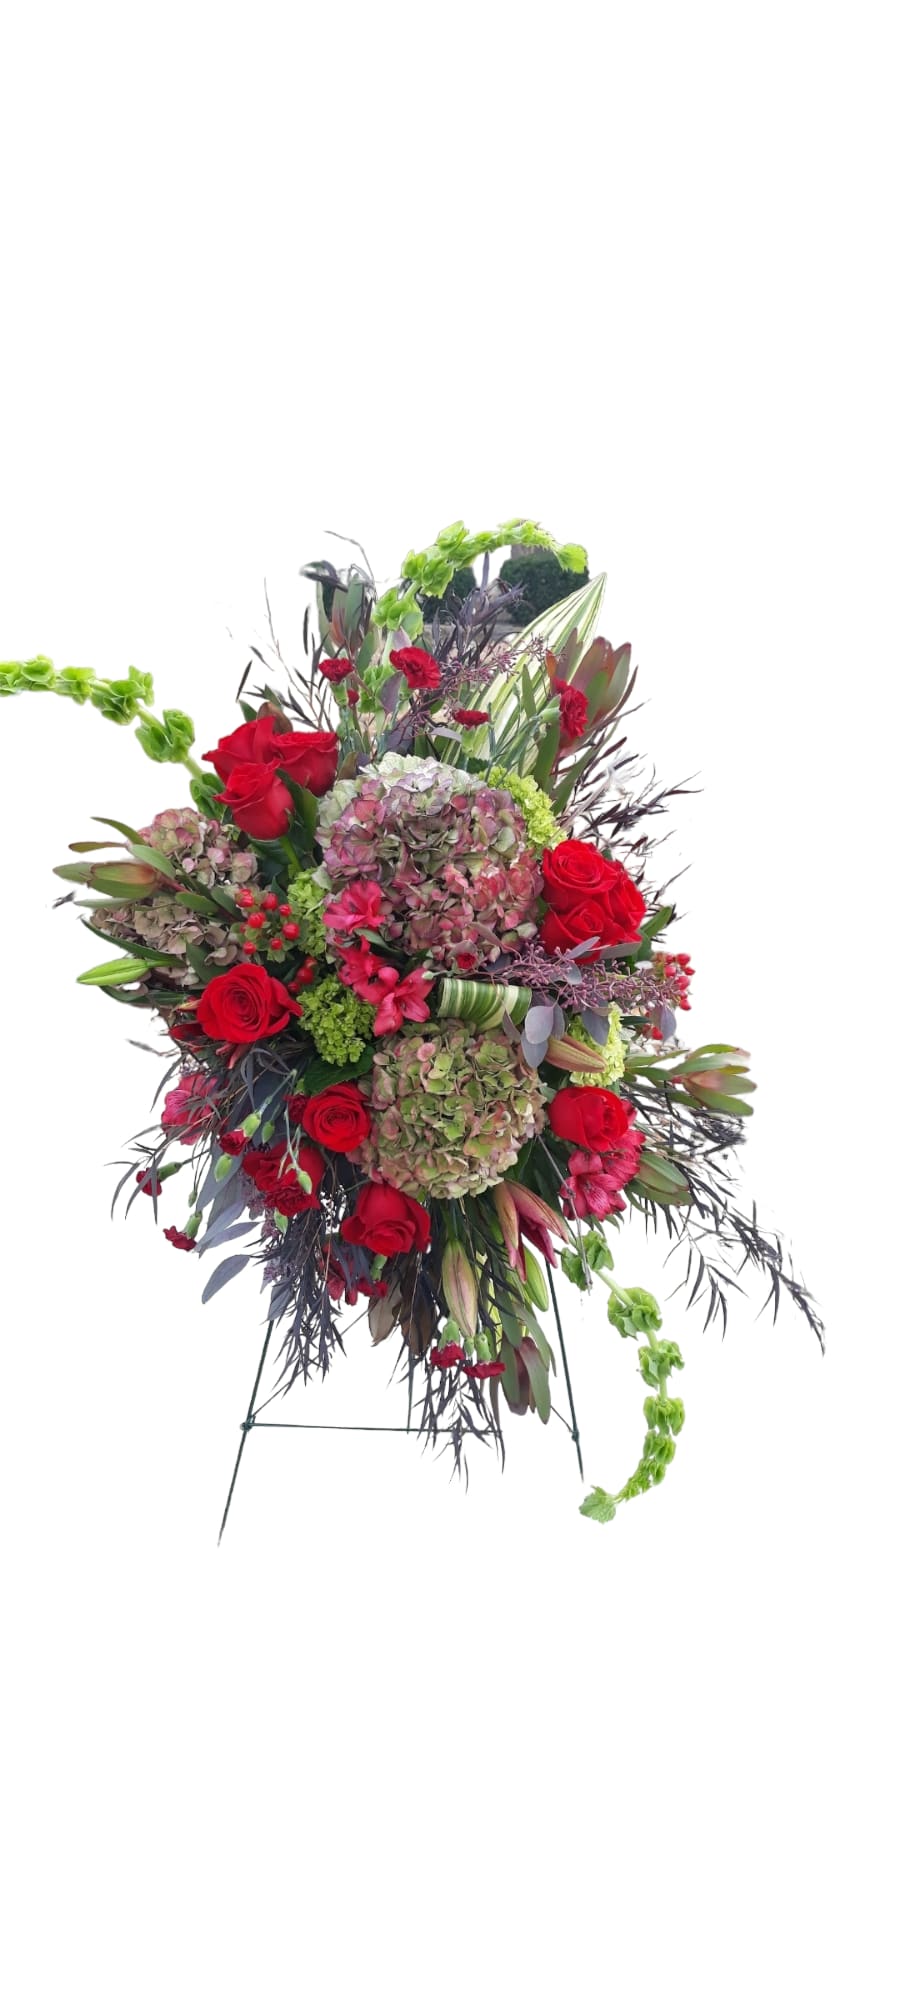 Stunning easel adorn with the freshest red blooms.